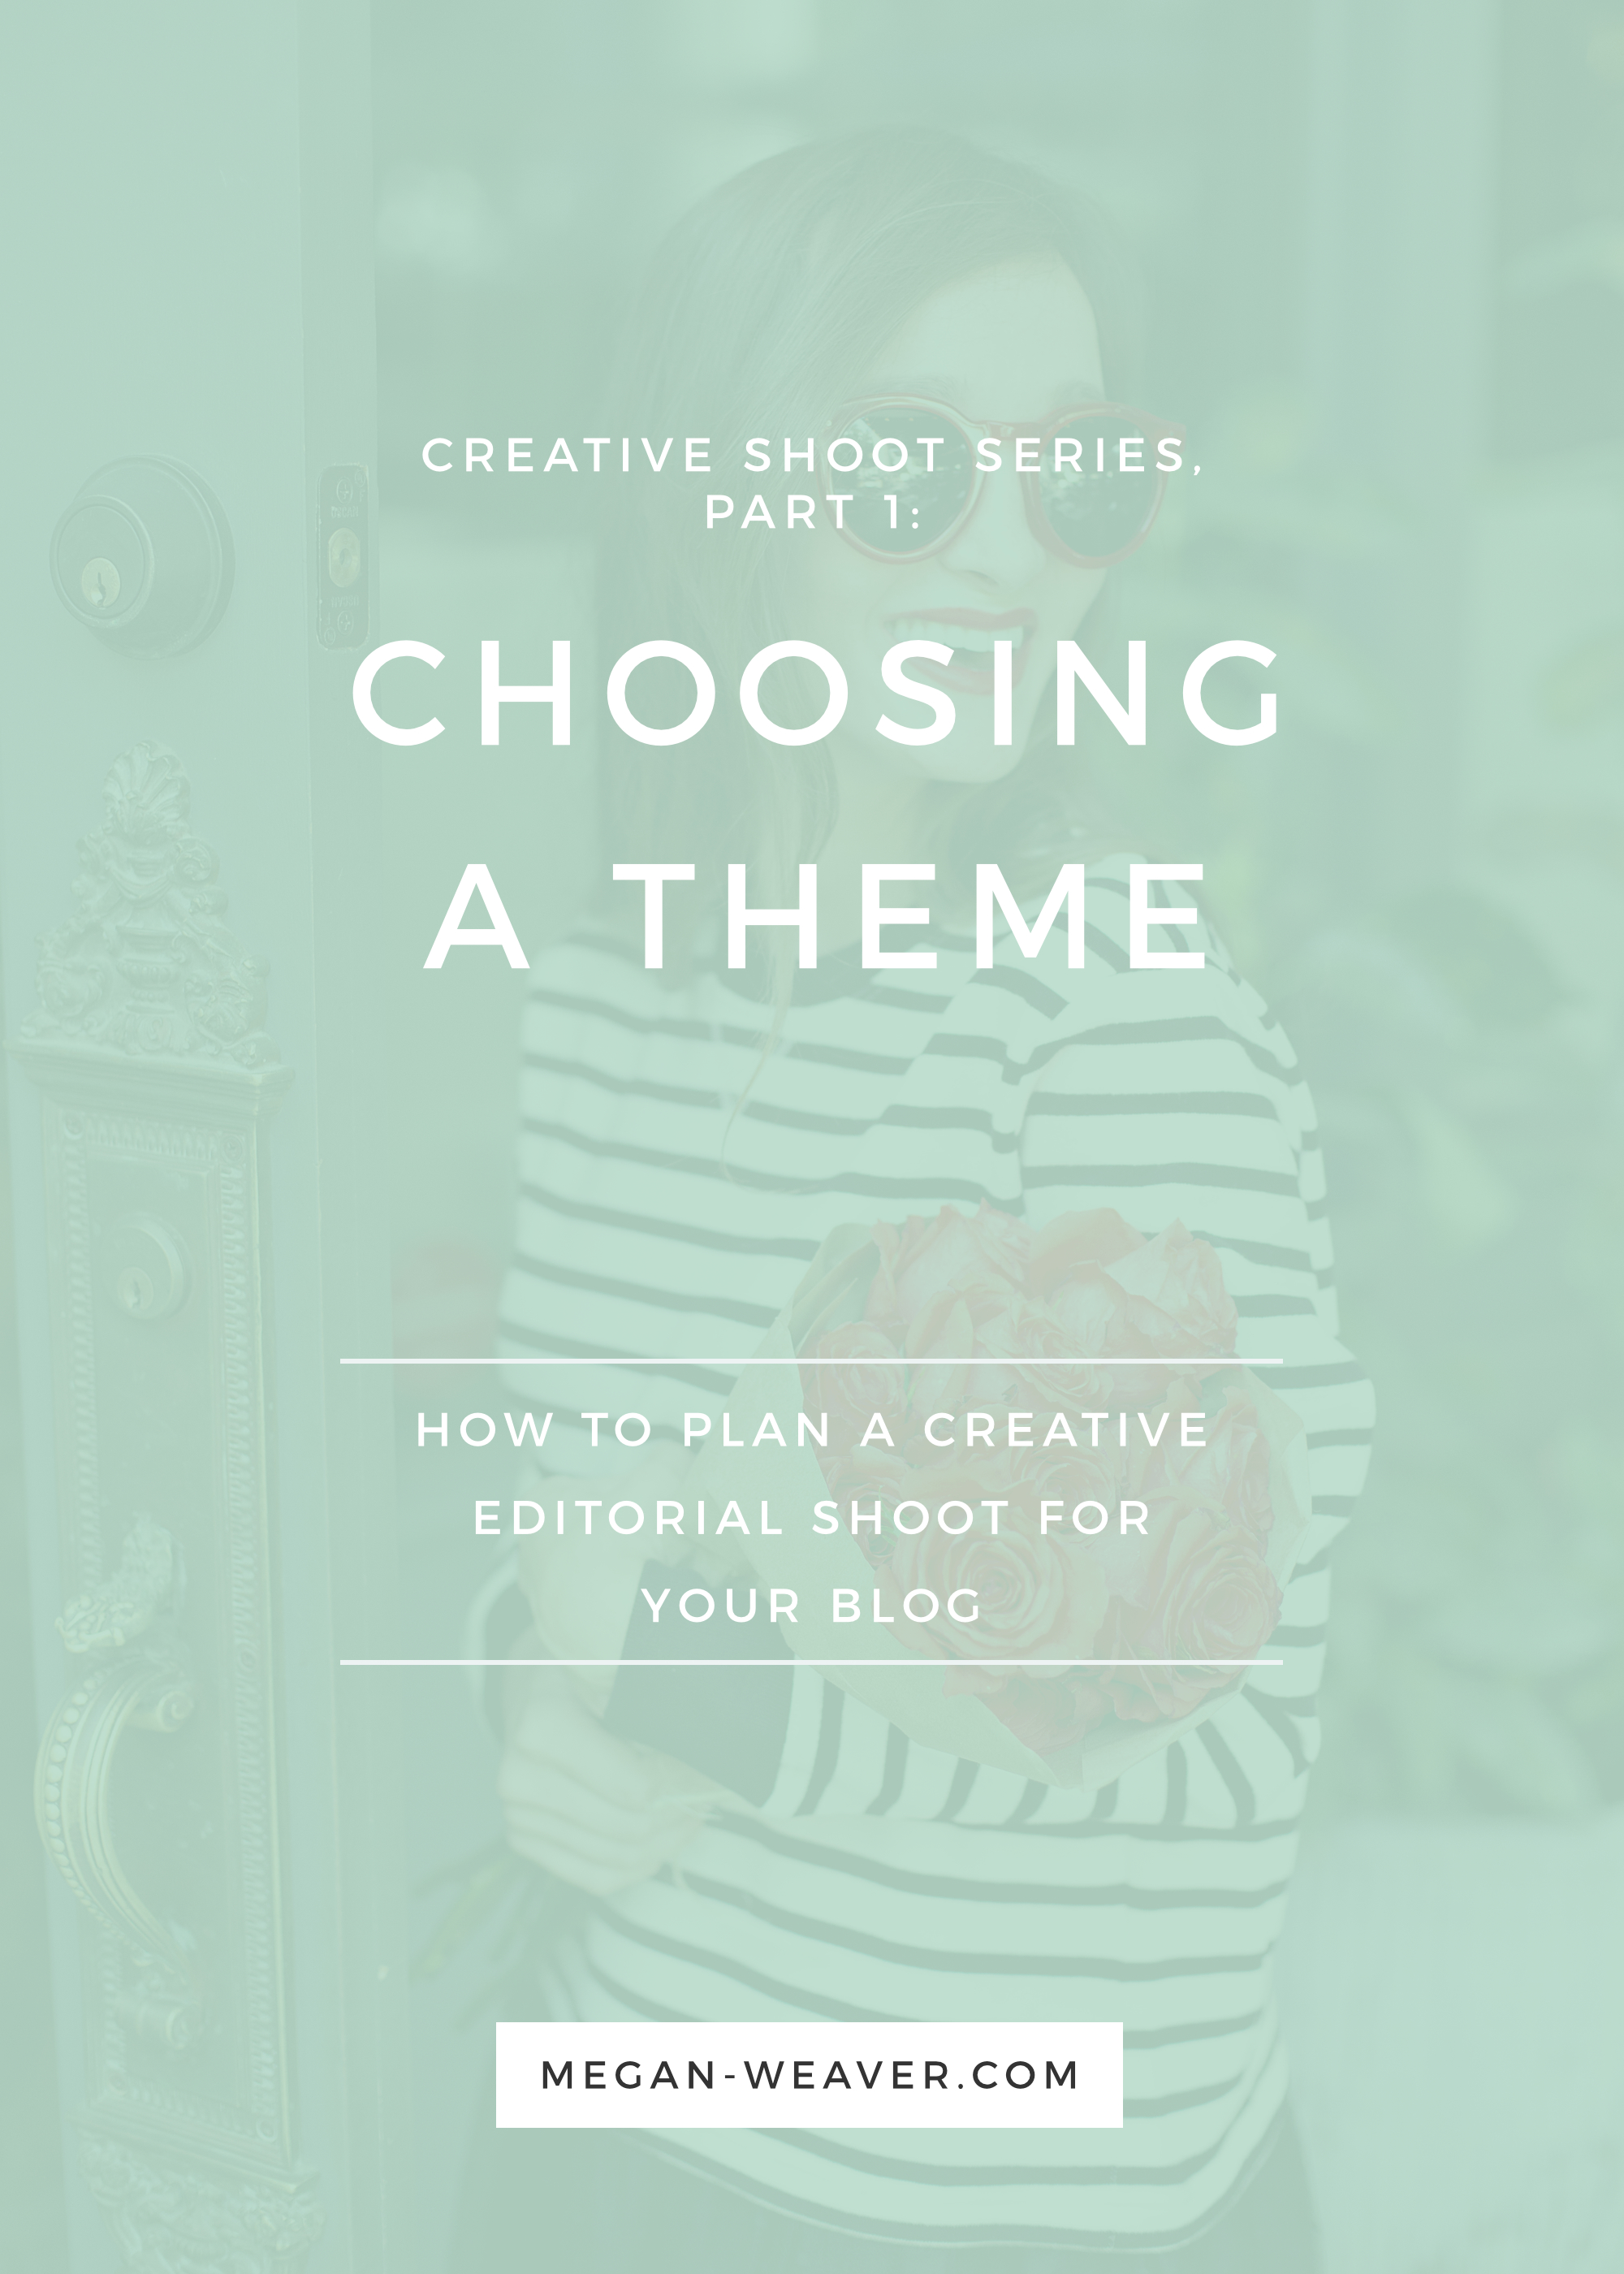 The first step to planning a creative editorial shoot for you blog is choosing a theme! In the first part of my 4-part series, I'll show you how to go about picking a theme that's right for your brand as a blogger or business.